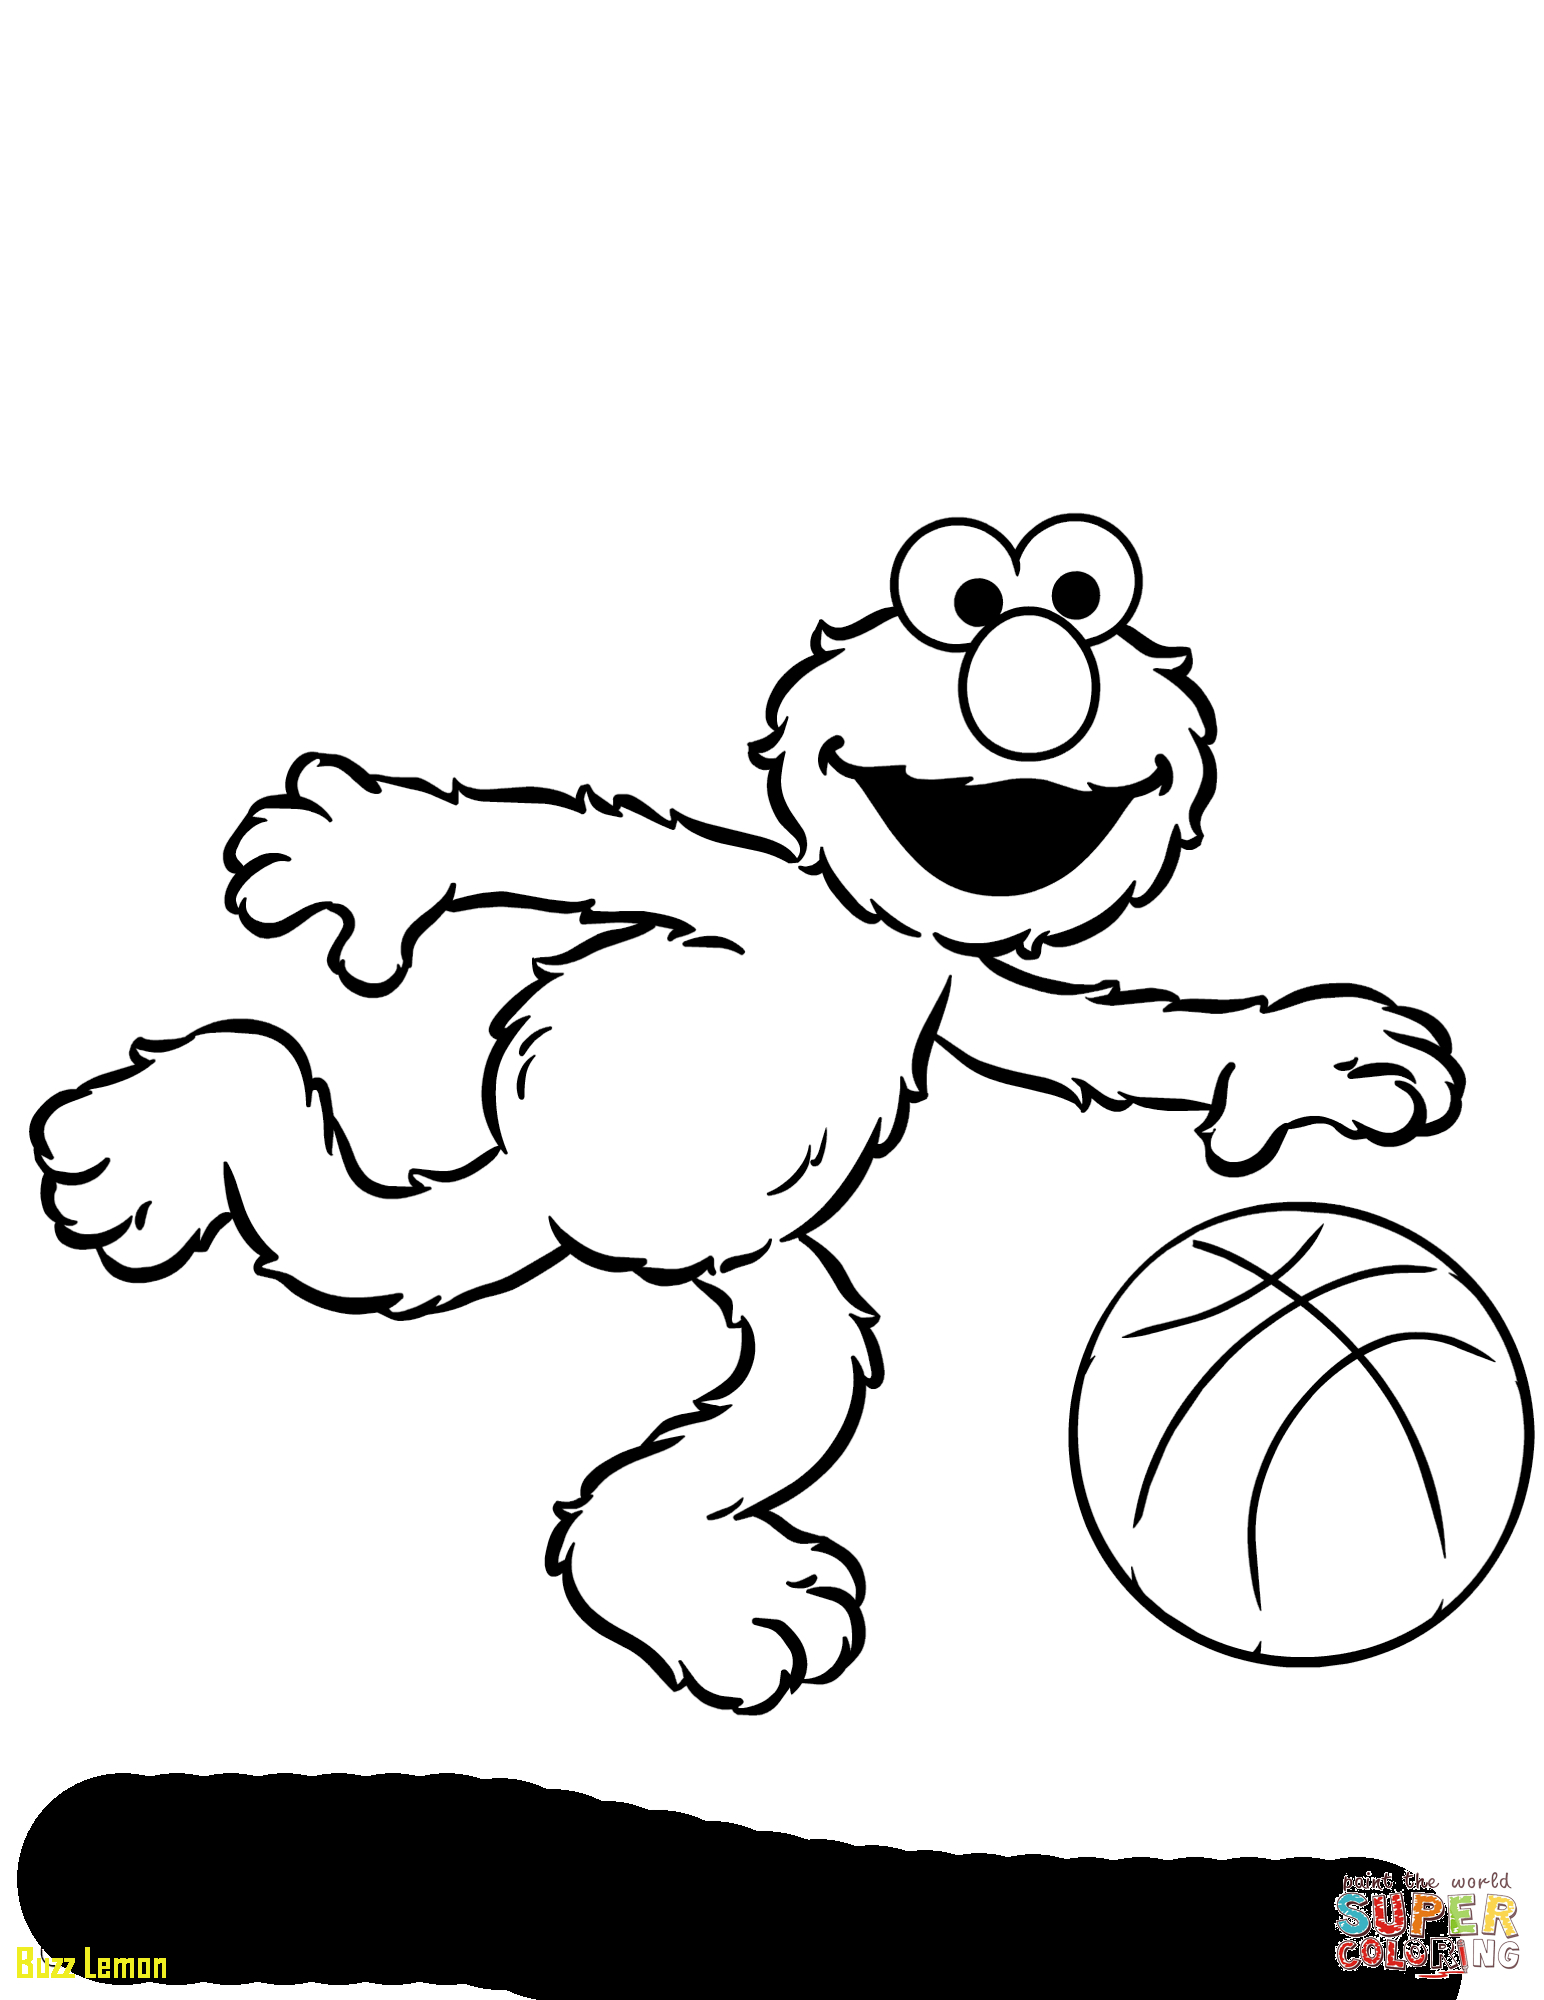 Coloring Pages Of Baby Elmo Elmo Printable Coloring Pages Fun Time